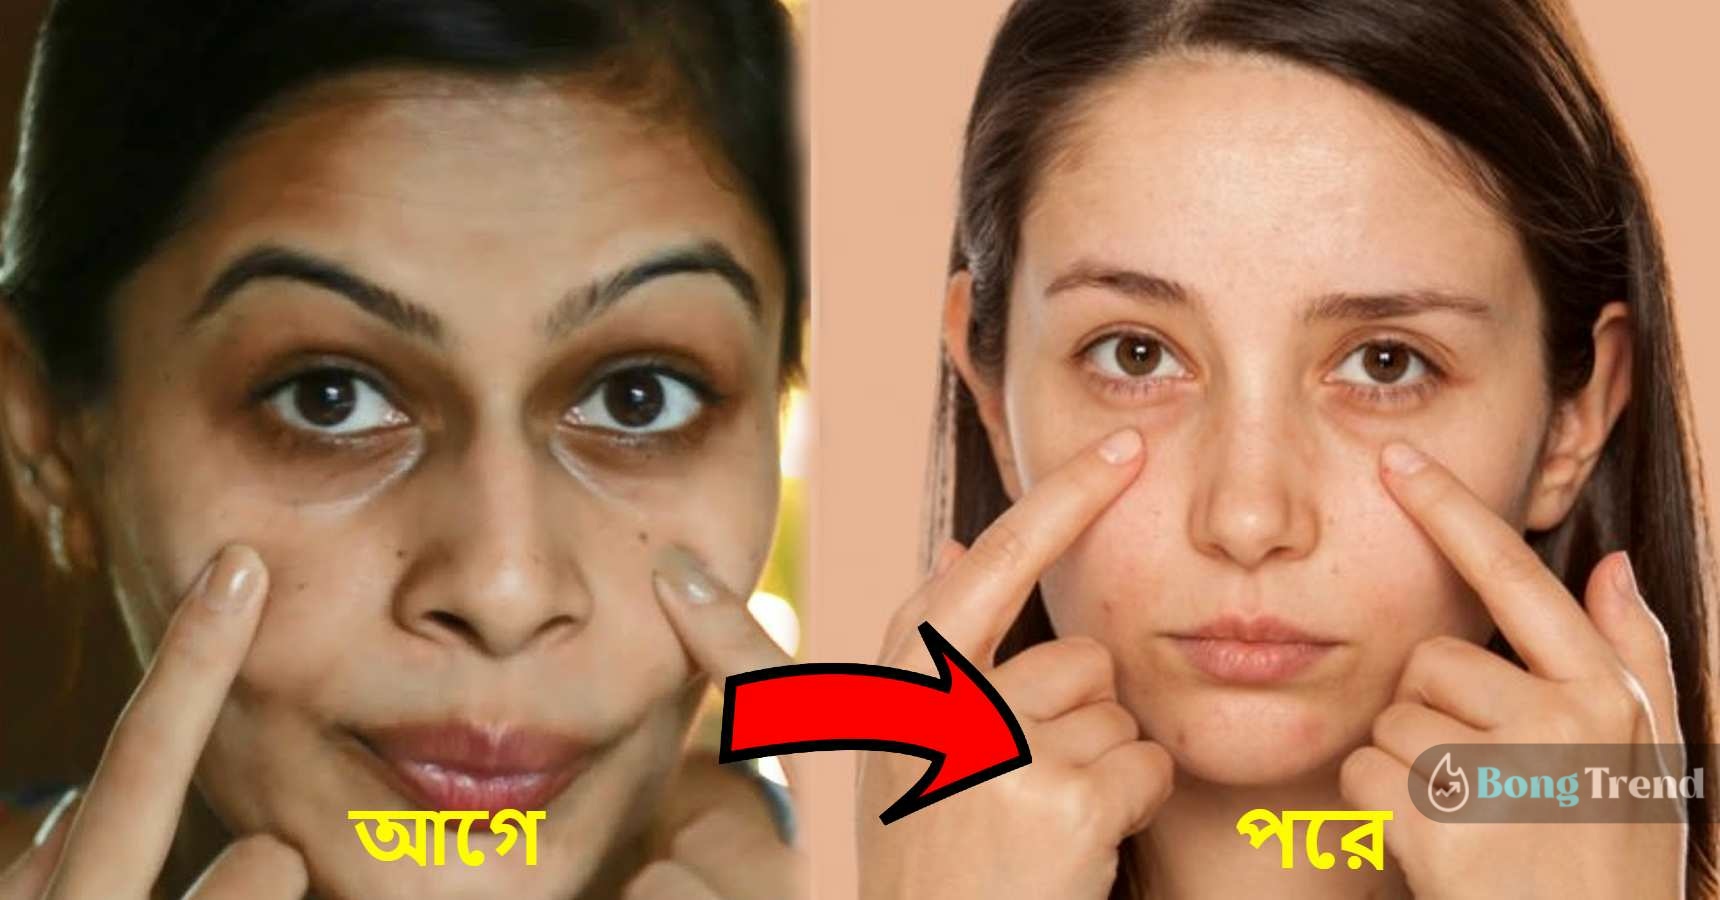 get rid of dark circles under eye with these easy home remedies